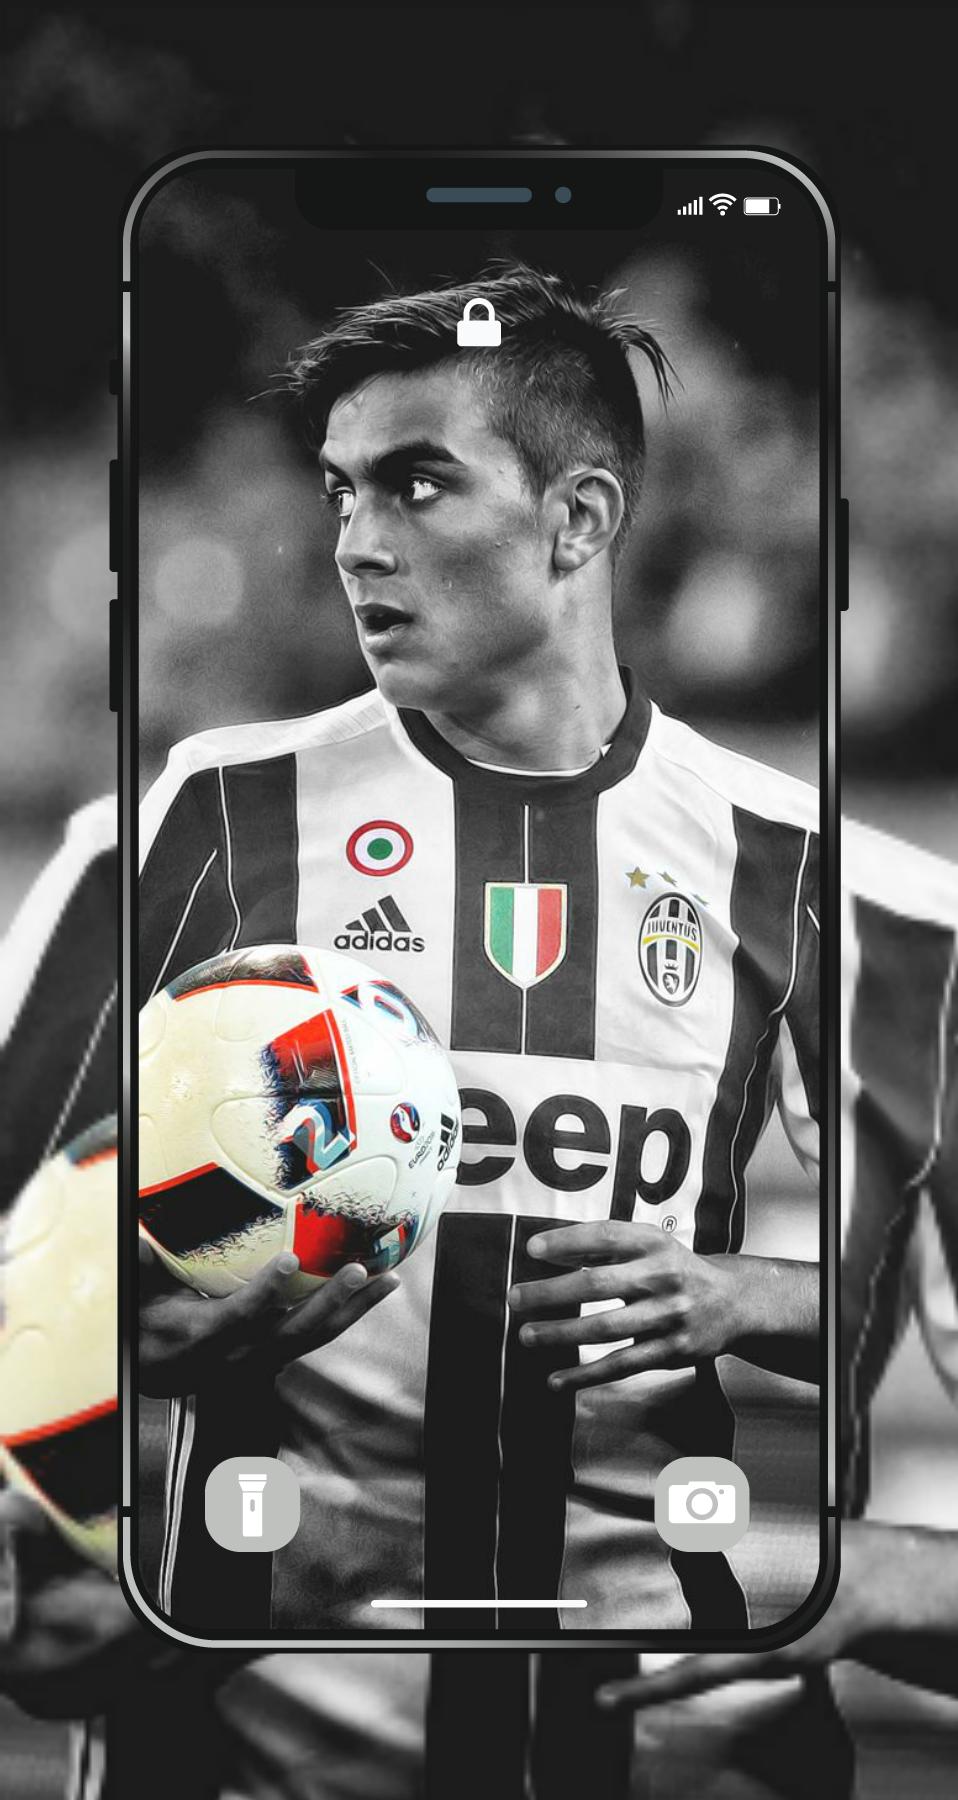 ⚽ ⚽⚽ Paulo Dybala Wallpaper HD 2020 ❤❤❤ APK for Android Download